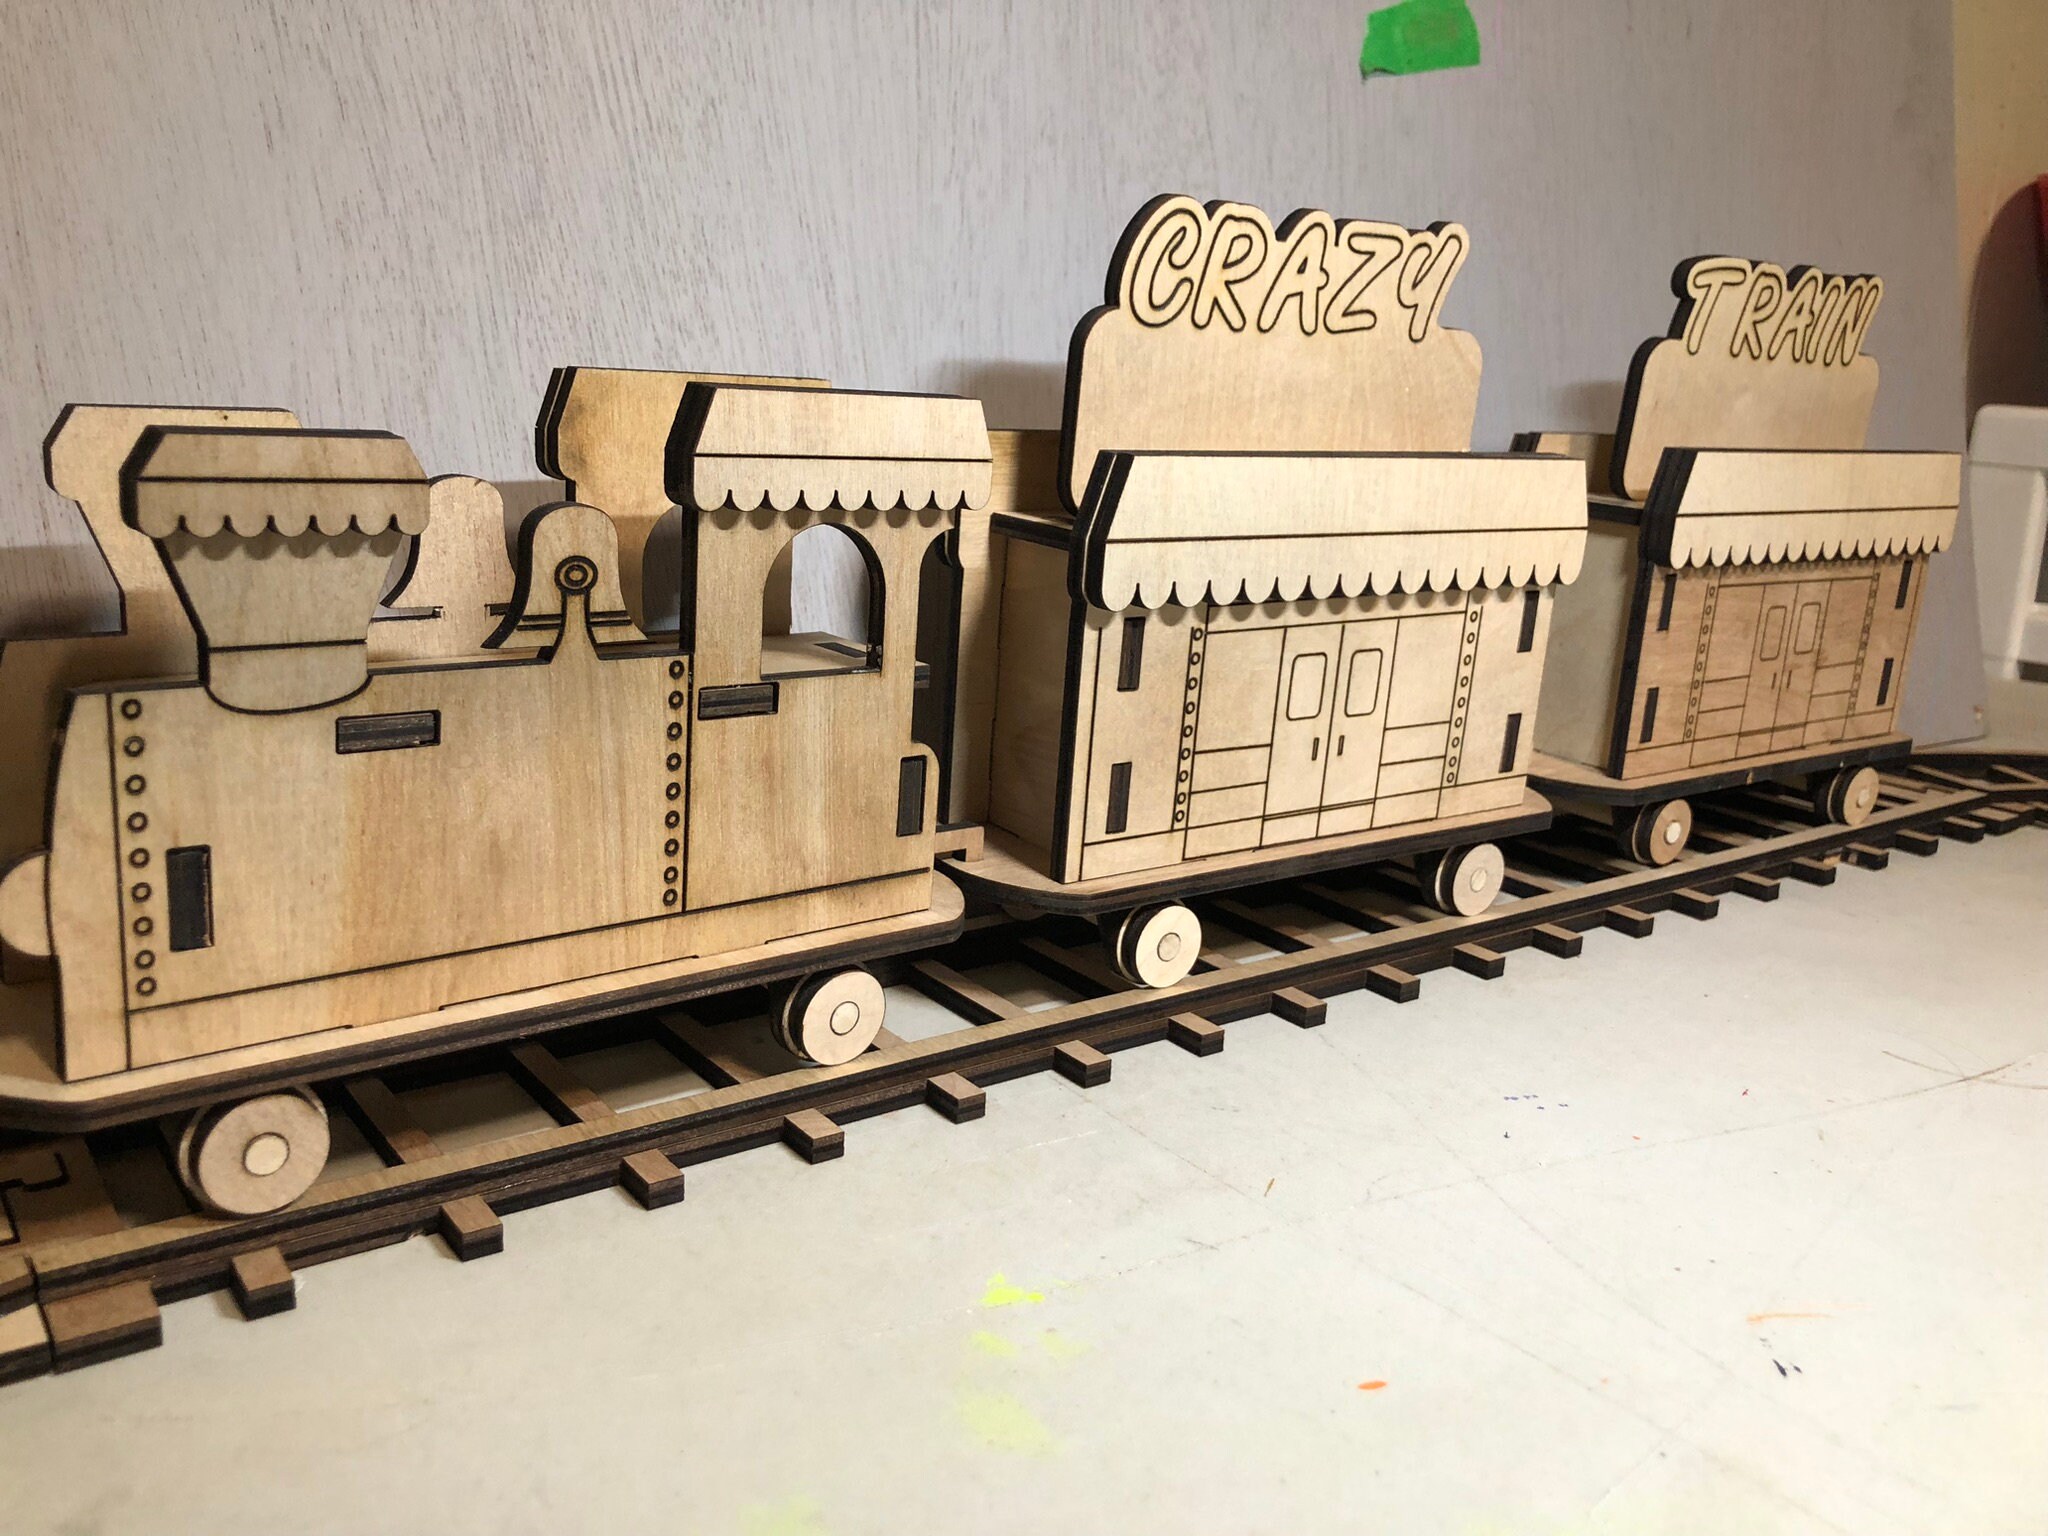  ROKR 3D Wooden Puzzle for Adults-Mechanical Train Model  Kits-Brain Teaser Puzzles-Vehicle Building Kits-Unique Gift for Kids on  Birthday/Christmas Day(1:80 Scale)(MC501-Prime Steam Express) : Toys & Games